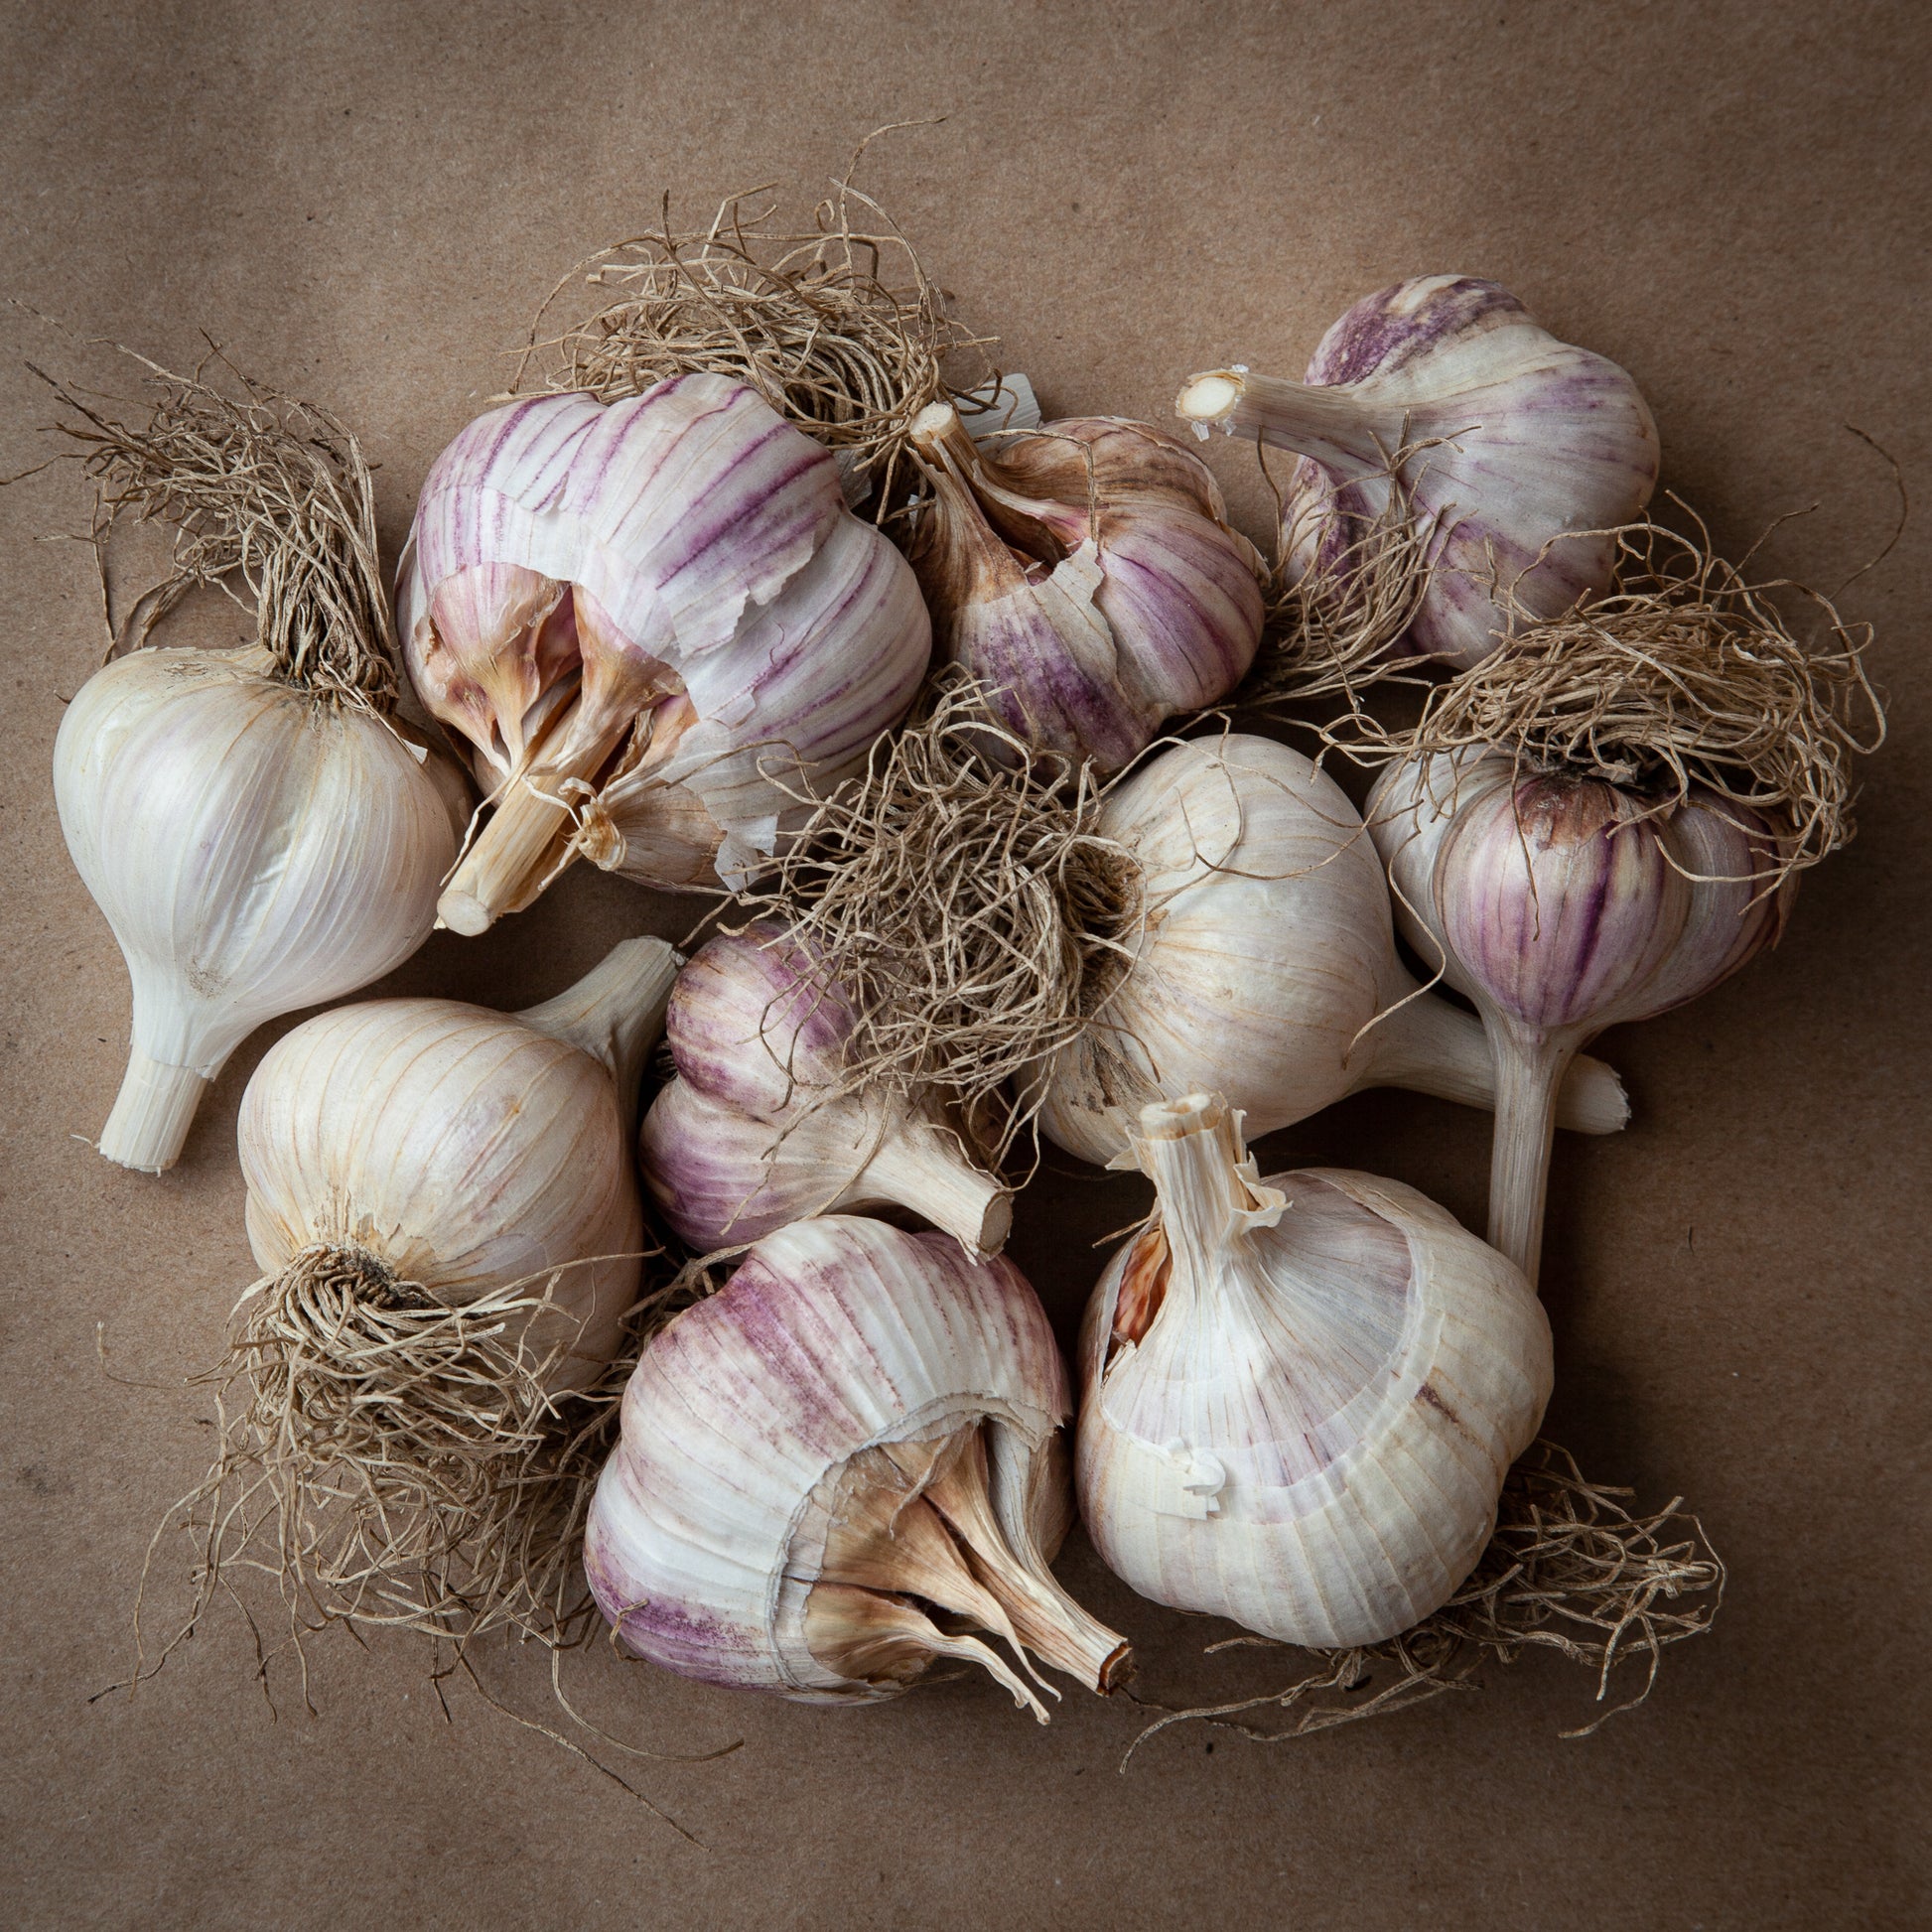 Ontario garlic for sale by the pound